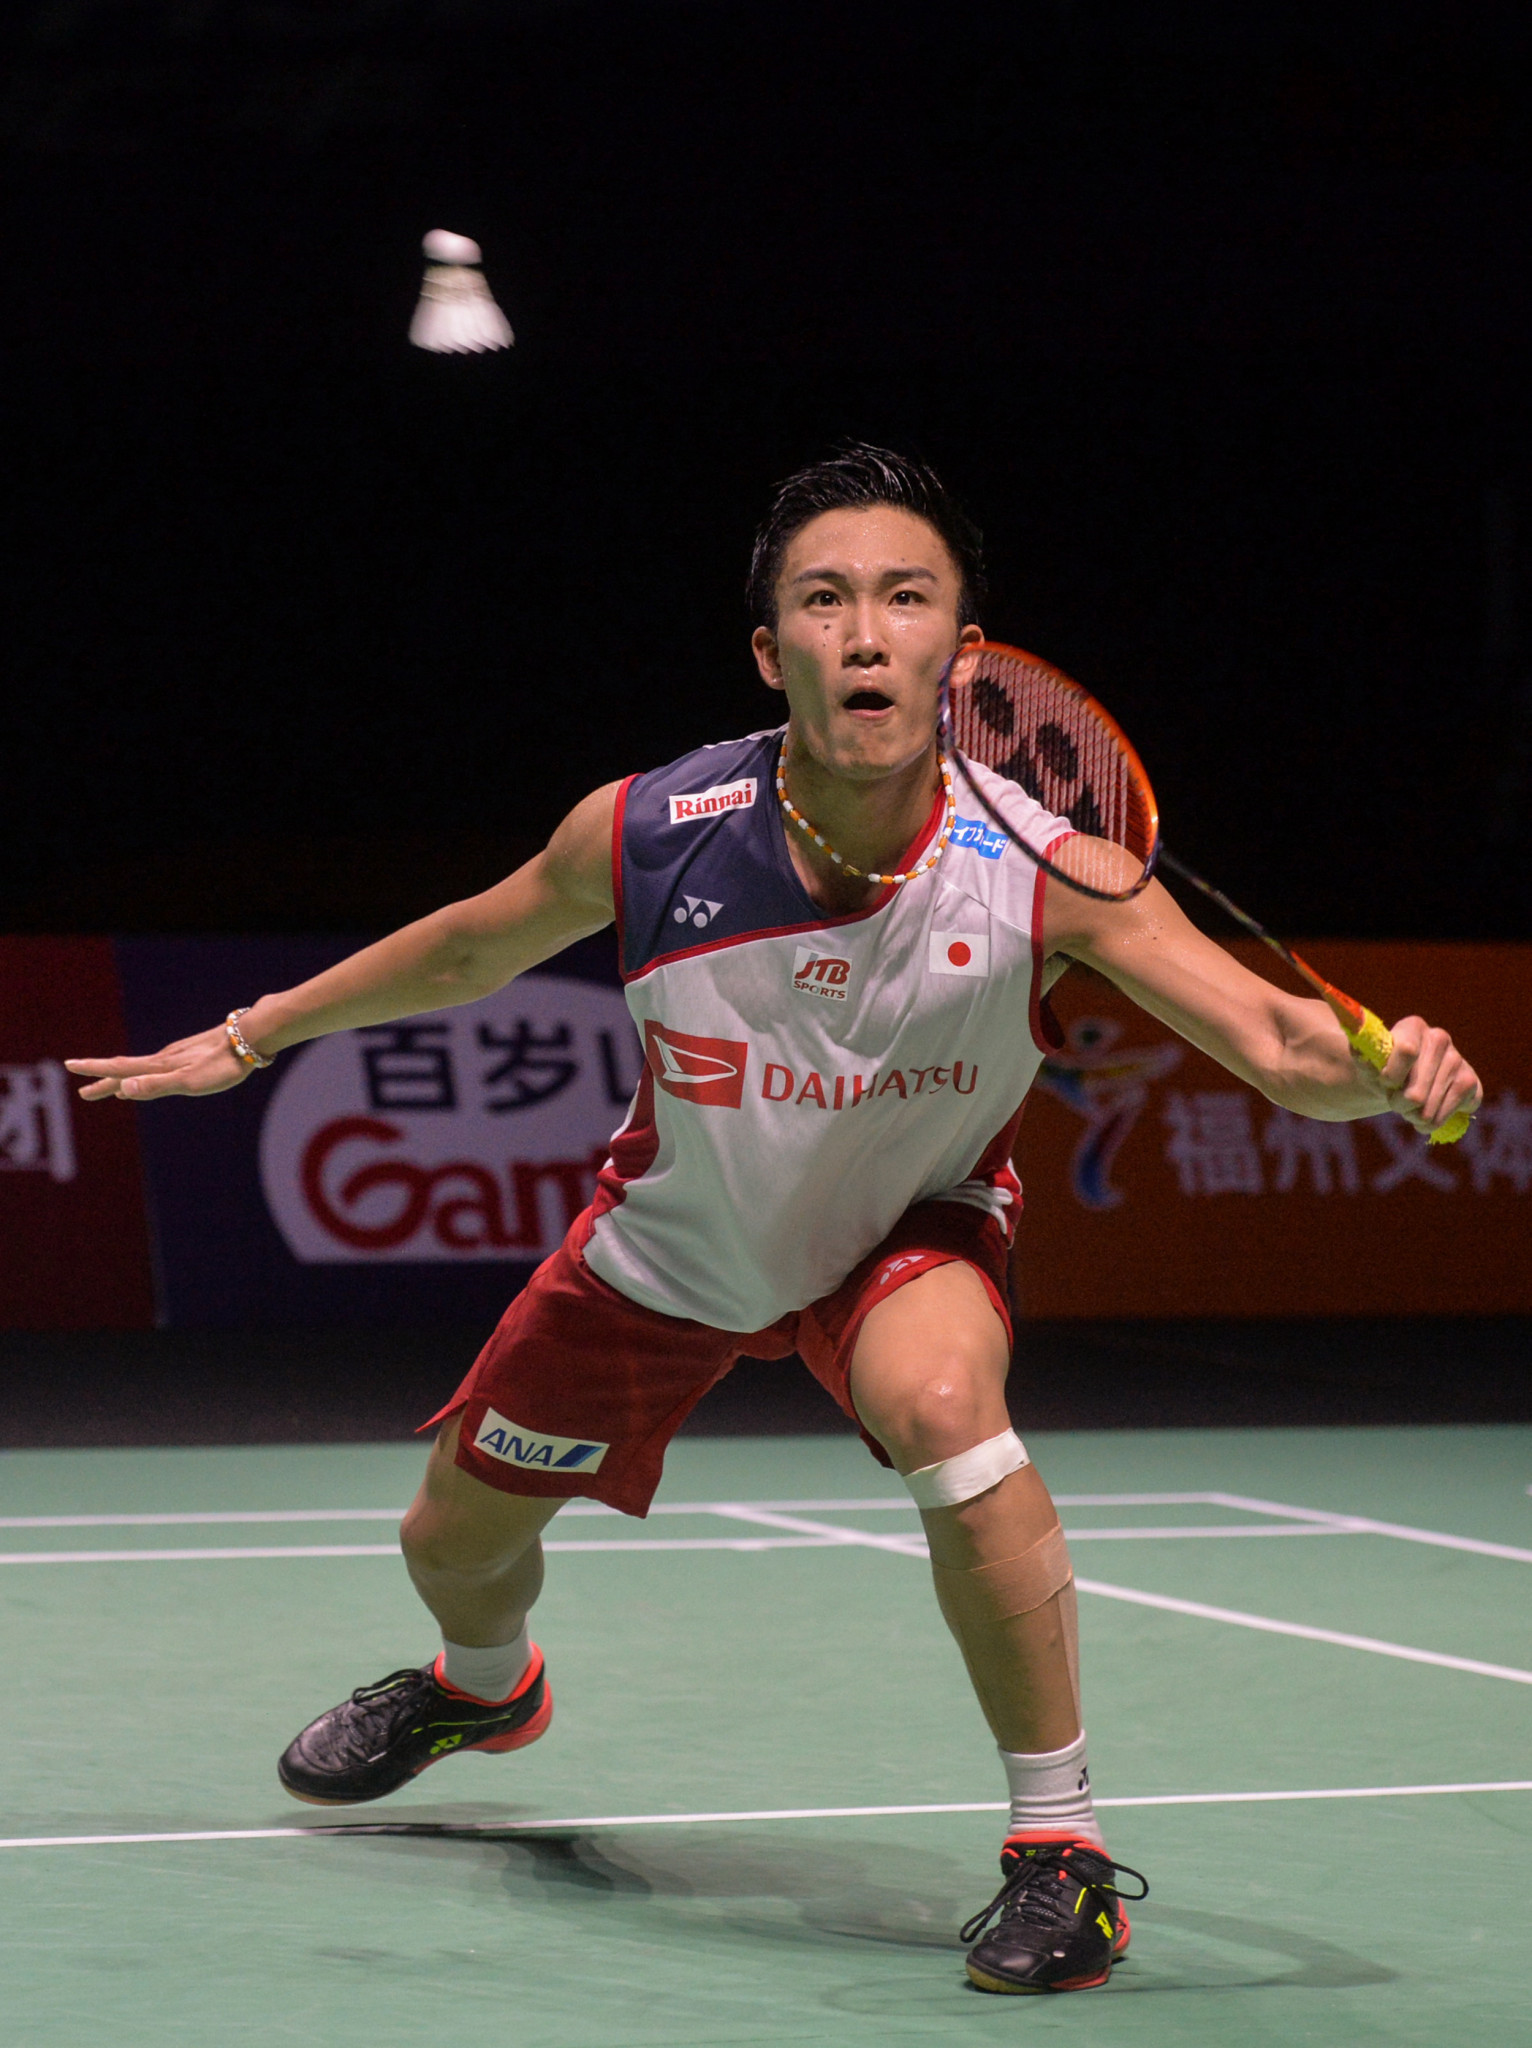 Kento Momota continued his fine run of form to reach the last four ©Getty Images